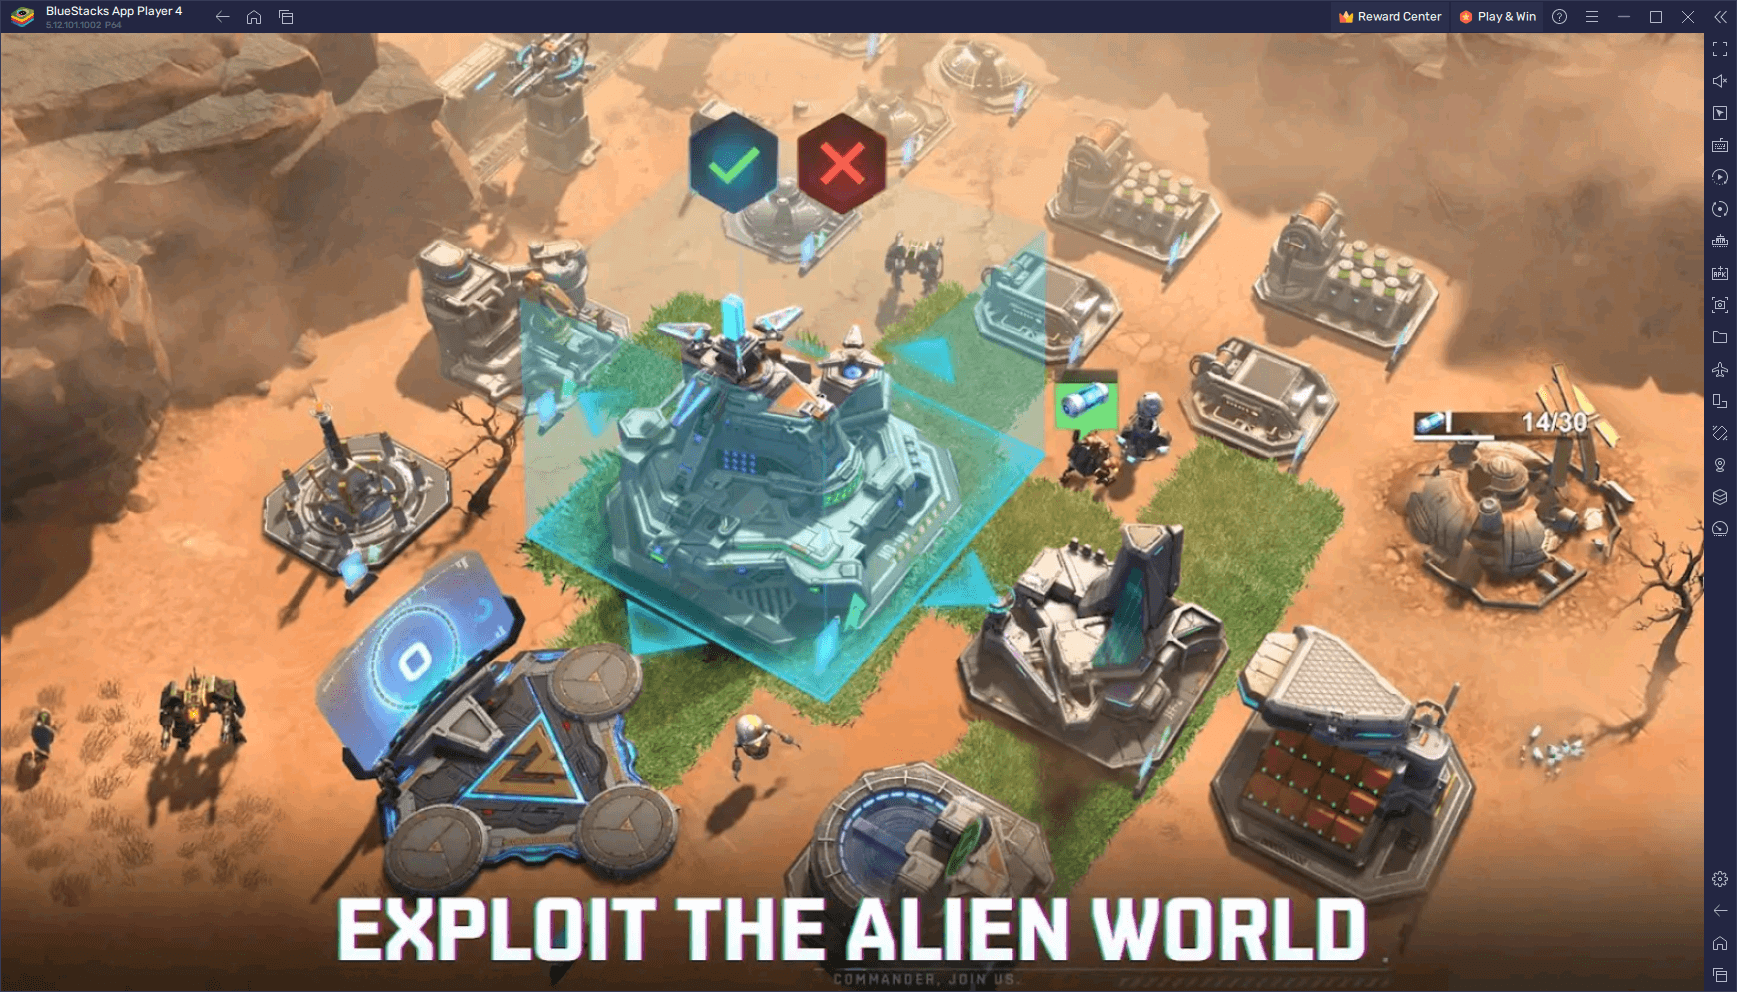 How to Play Project Entropy on PC With BlueStacks